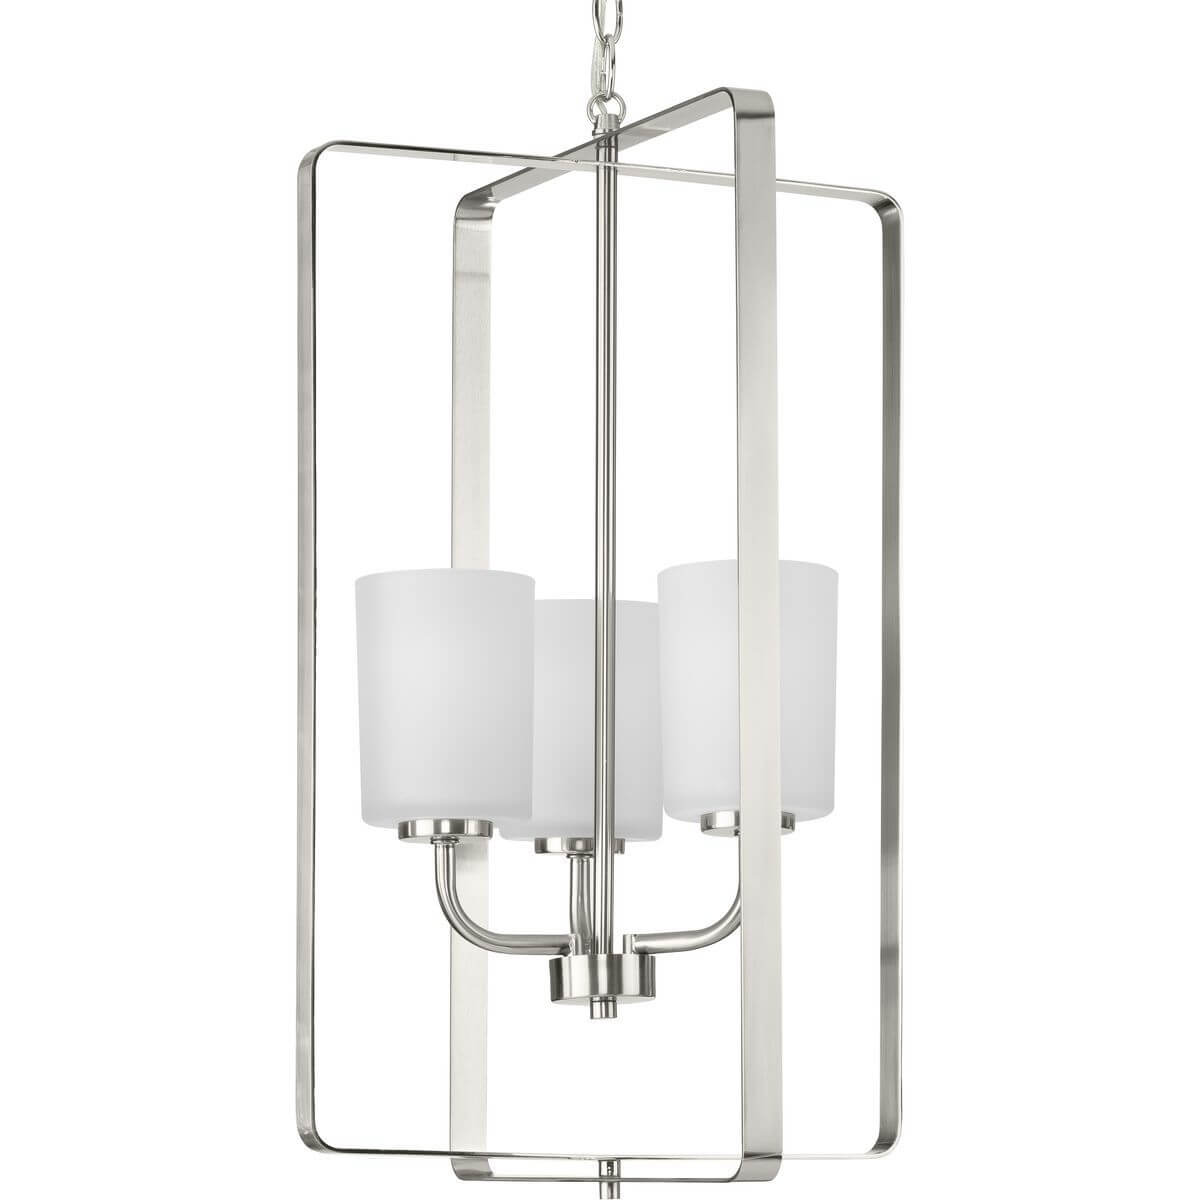 Progress Lighting League 3 Light 16 inch Foyer Chandelier in Brushed Nickel with Etched Glass P500342-009